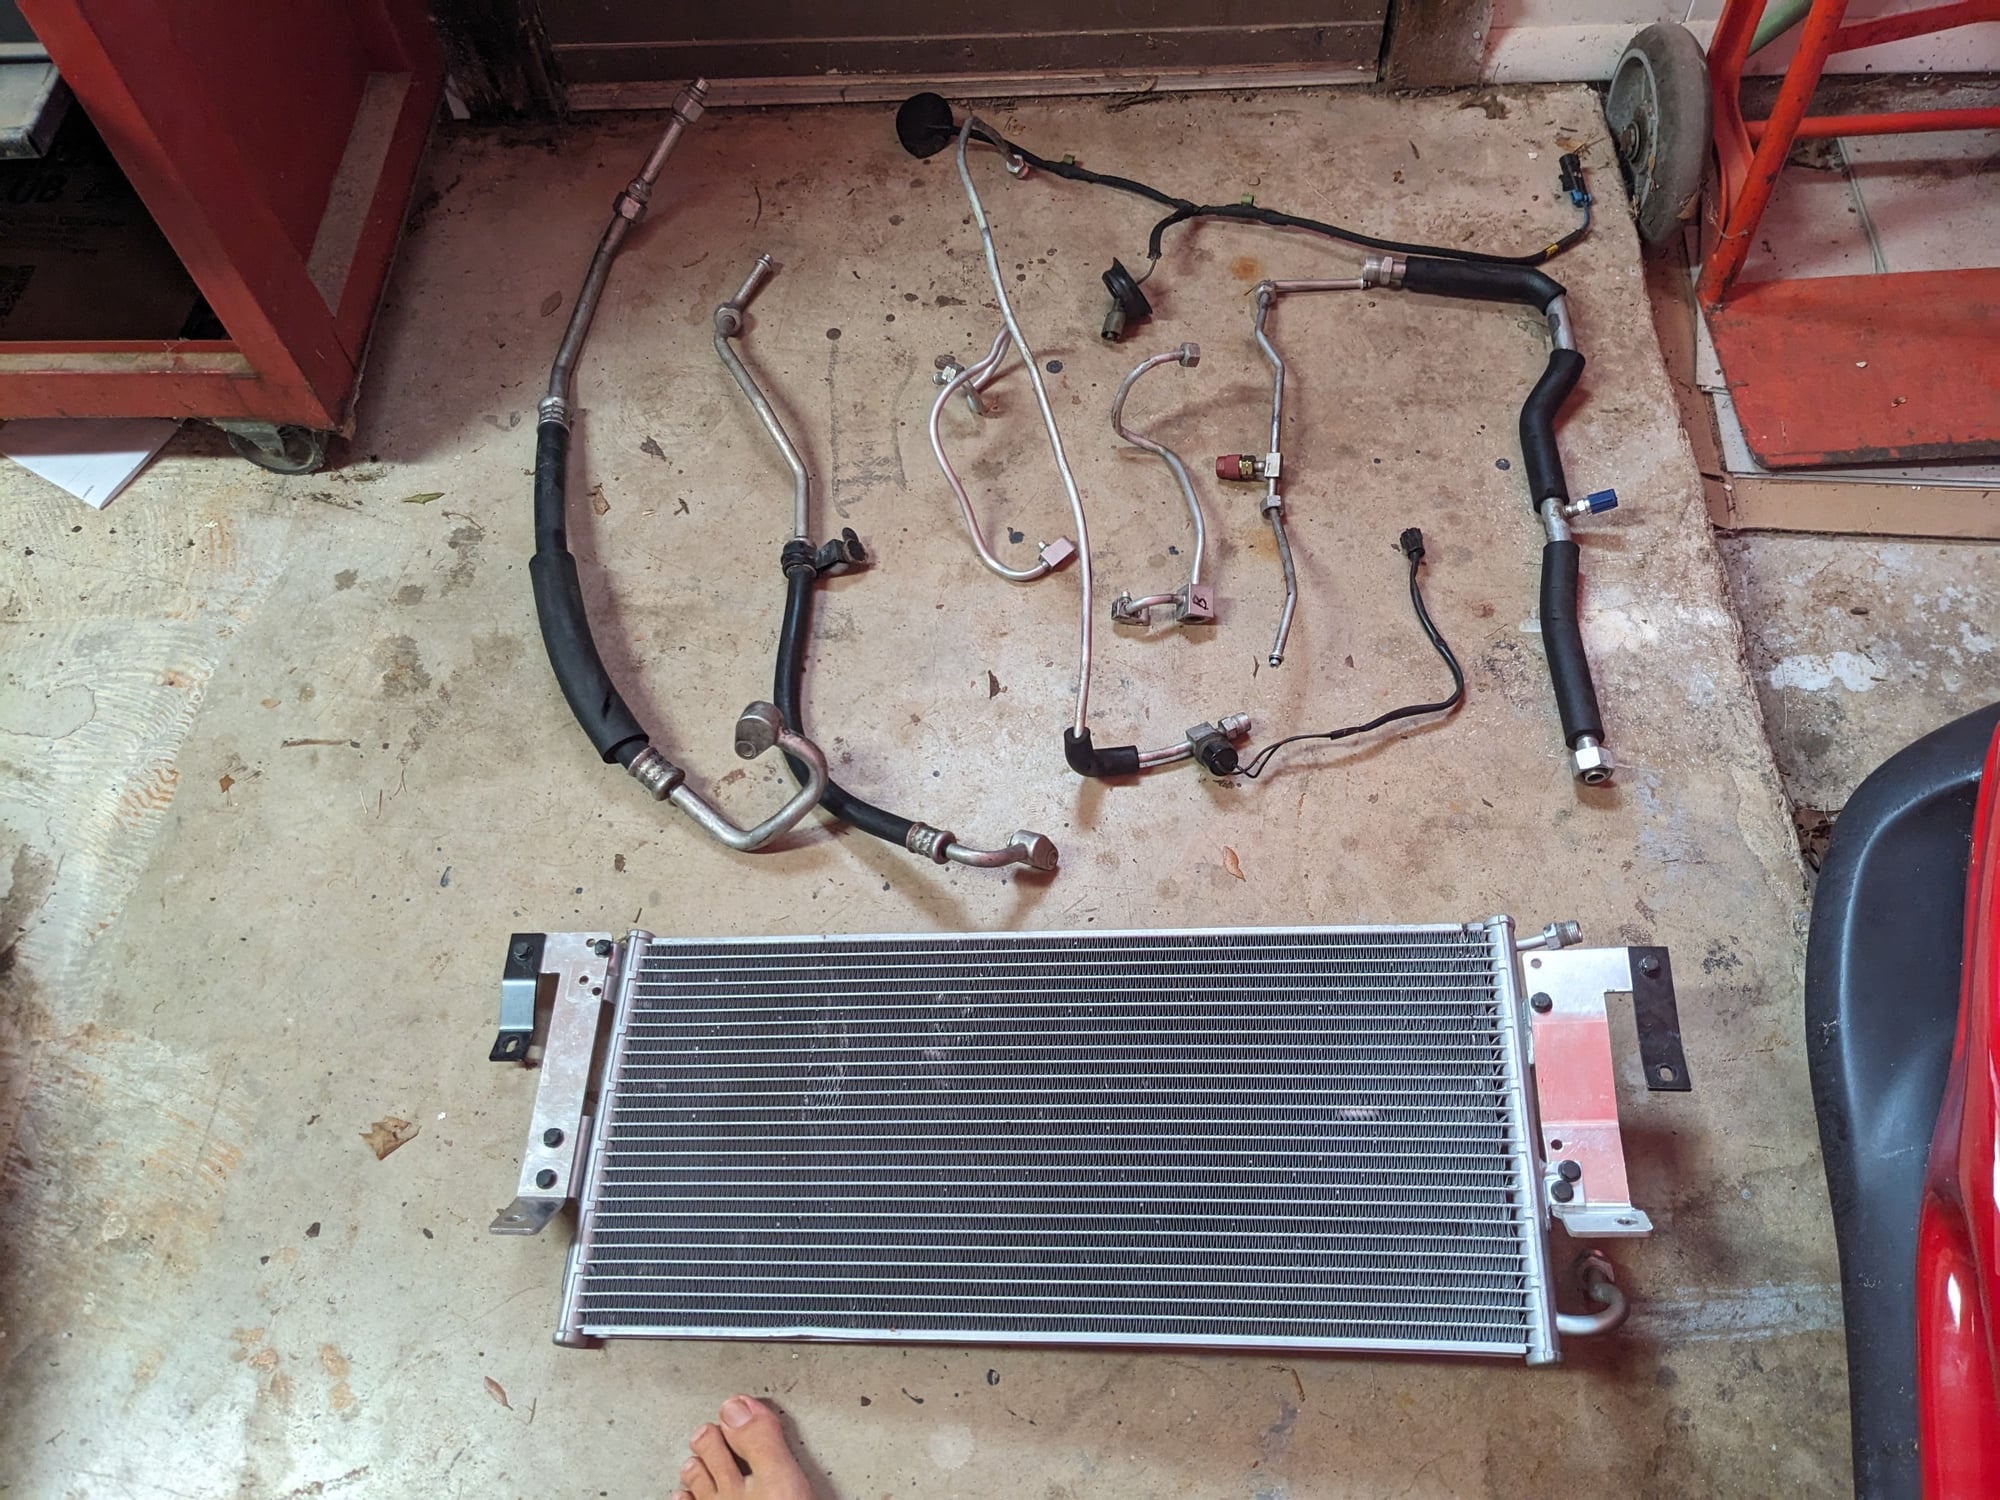 Miscellaneous - FD MANA A/C Lines and Condensor - Used - 1993 to 1995 Mazda RX-7 - Austin, TX 78759, United States